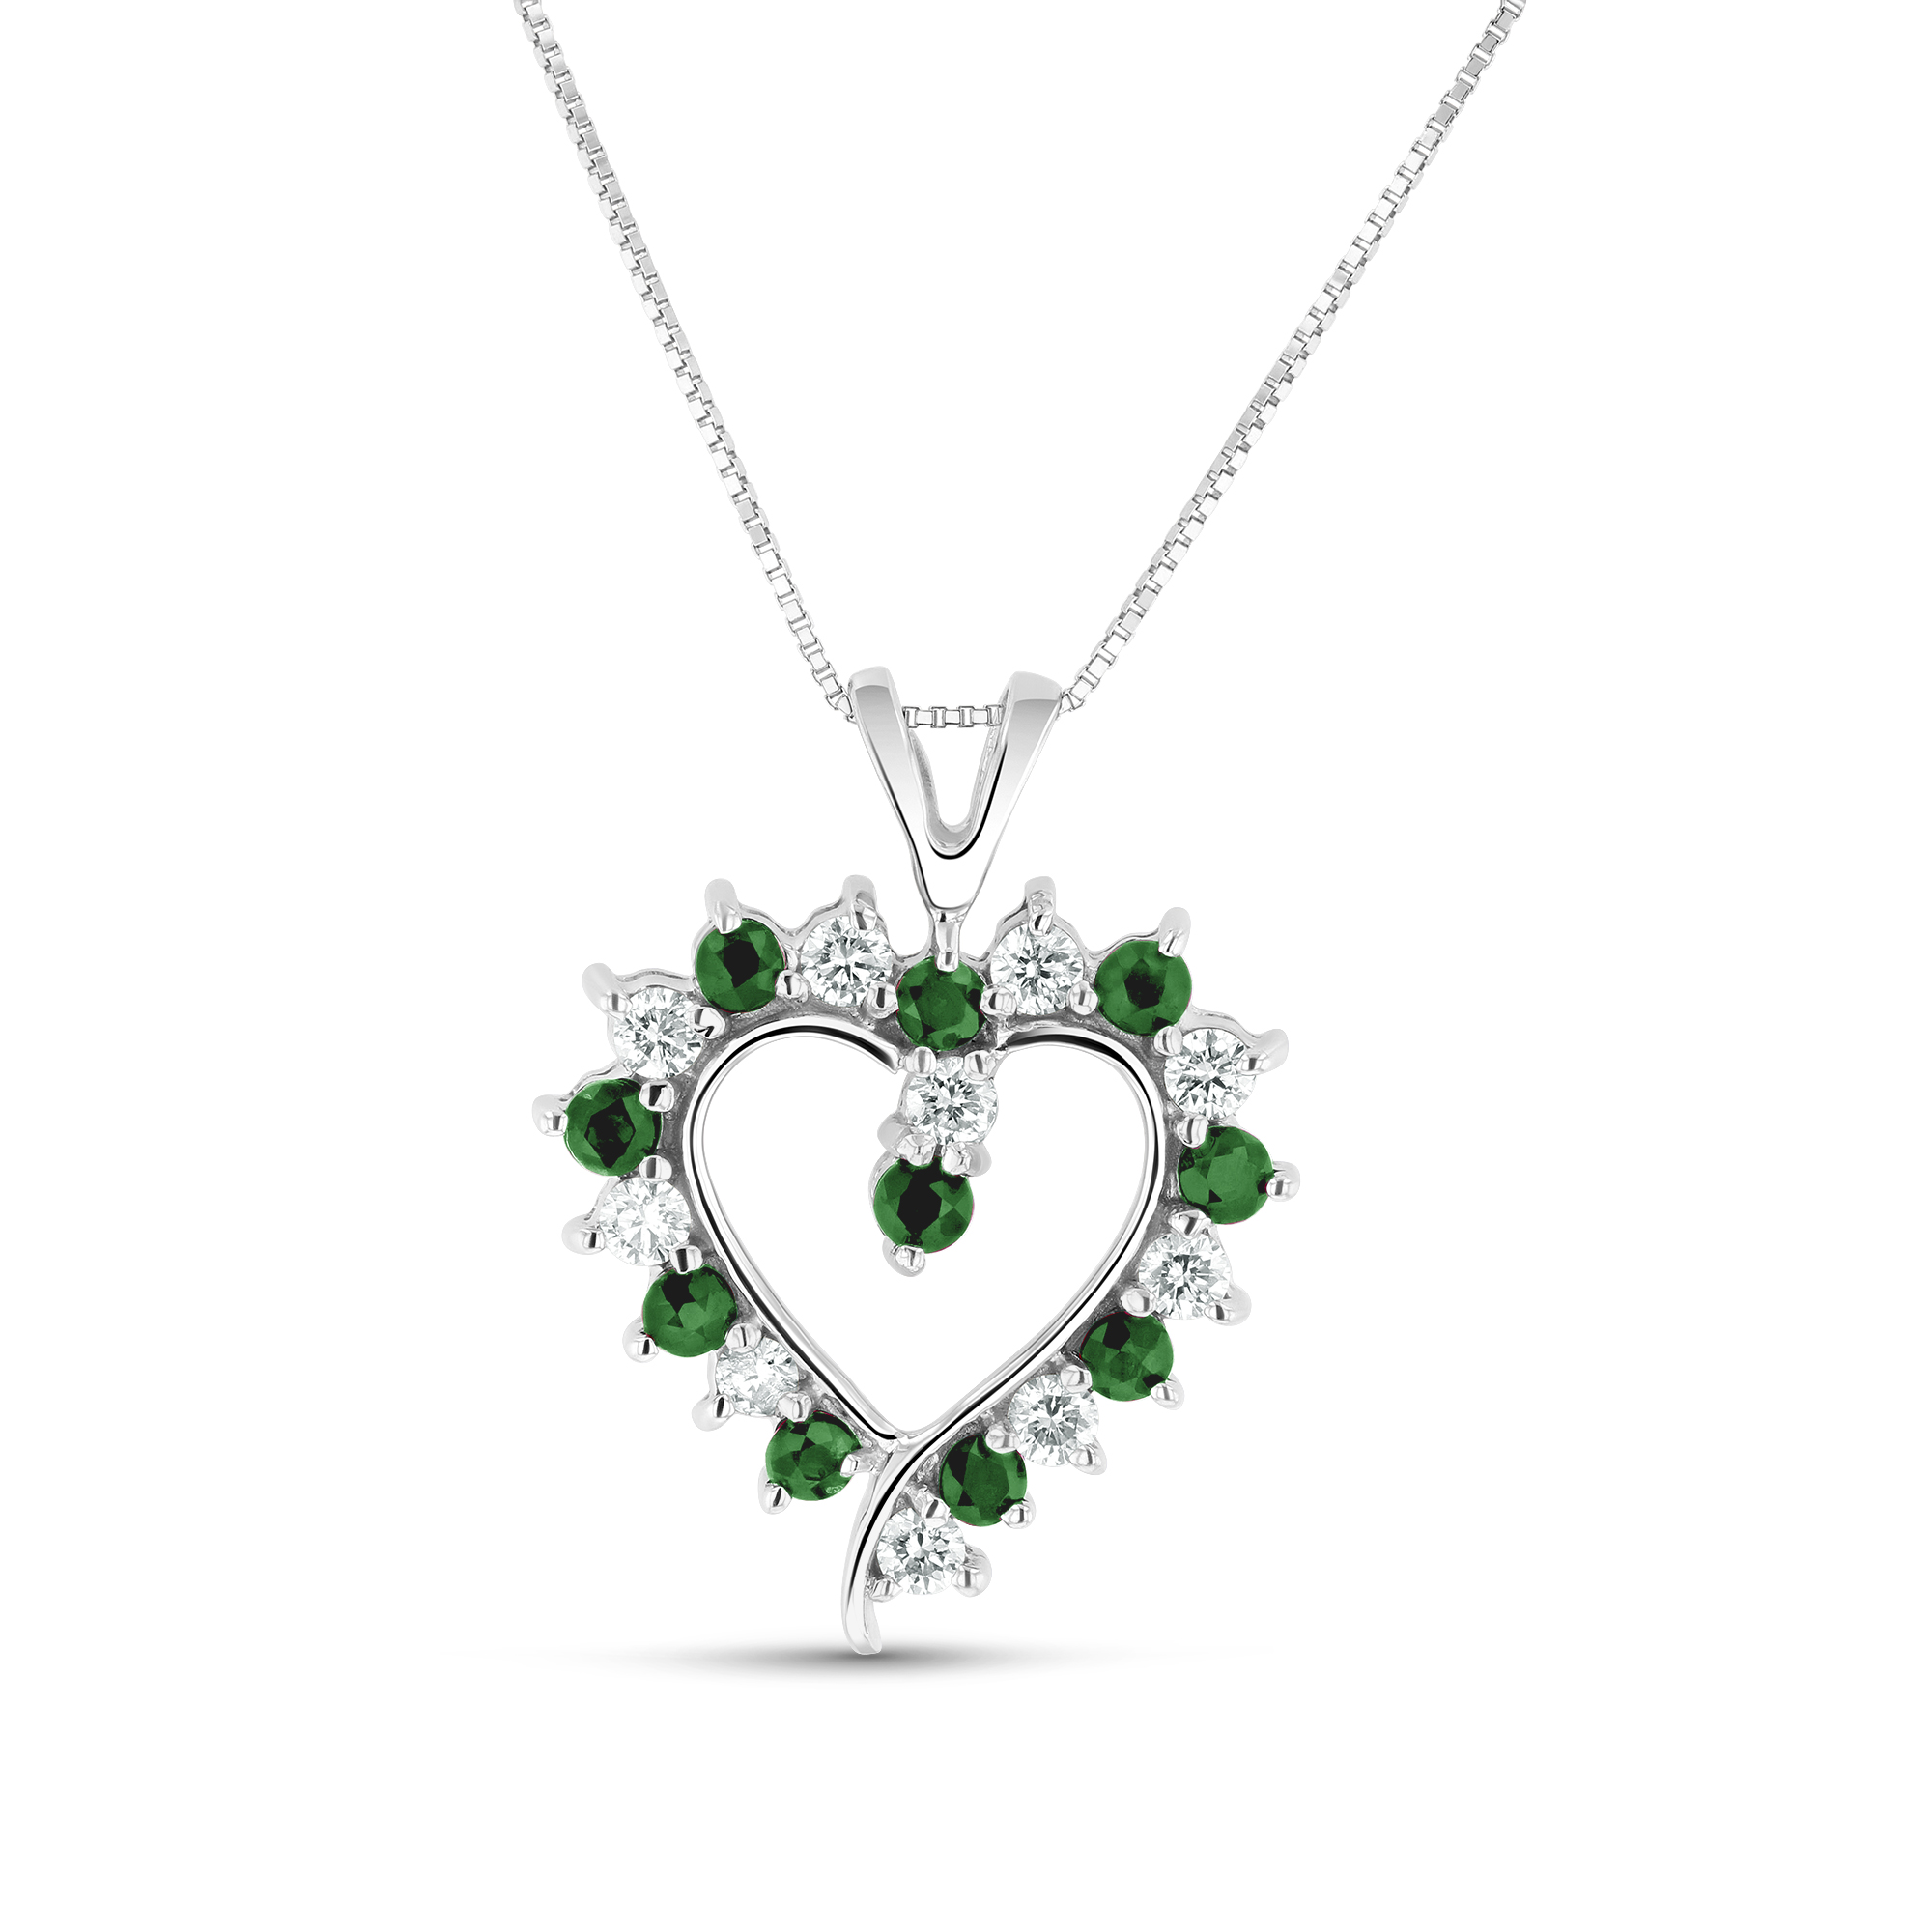 View 0.85ctw Diamond and Emerald Heart Shaped Pendant in 14k White Gold